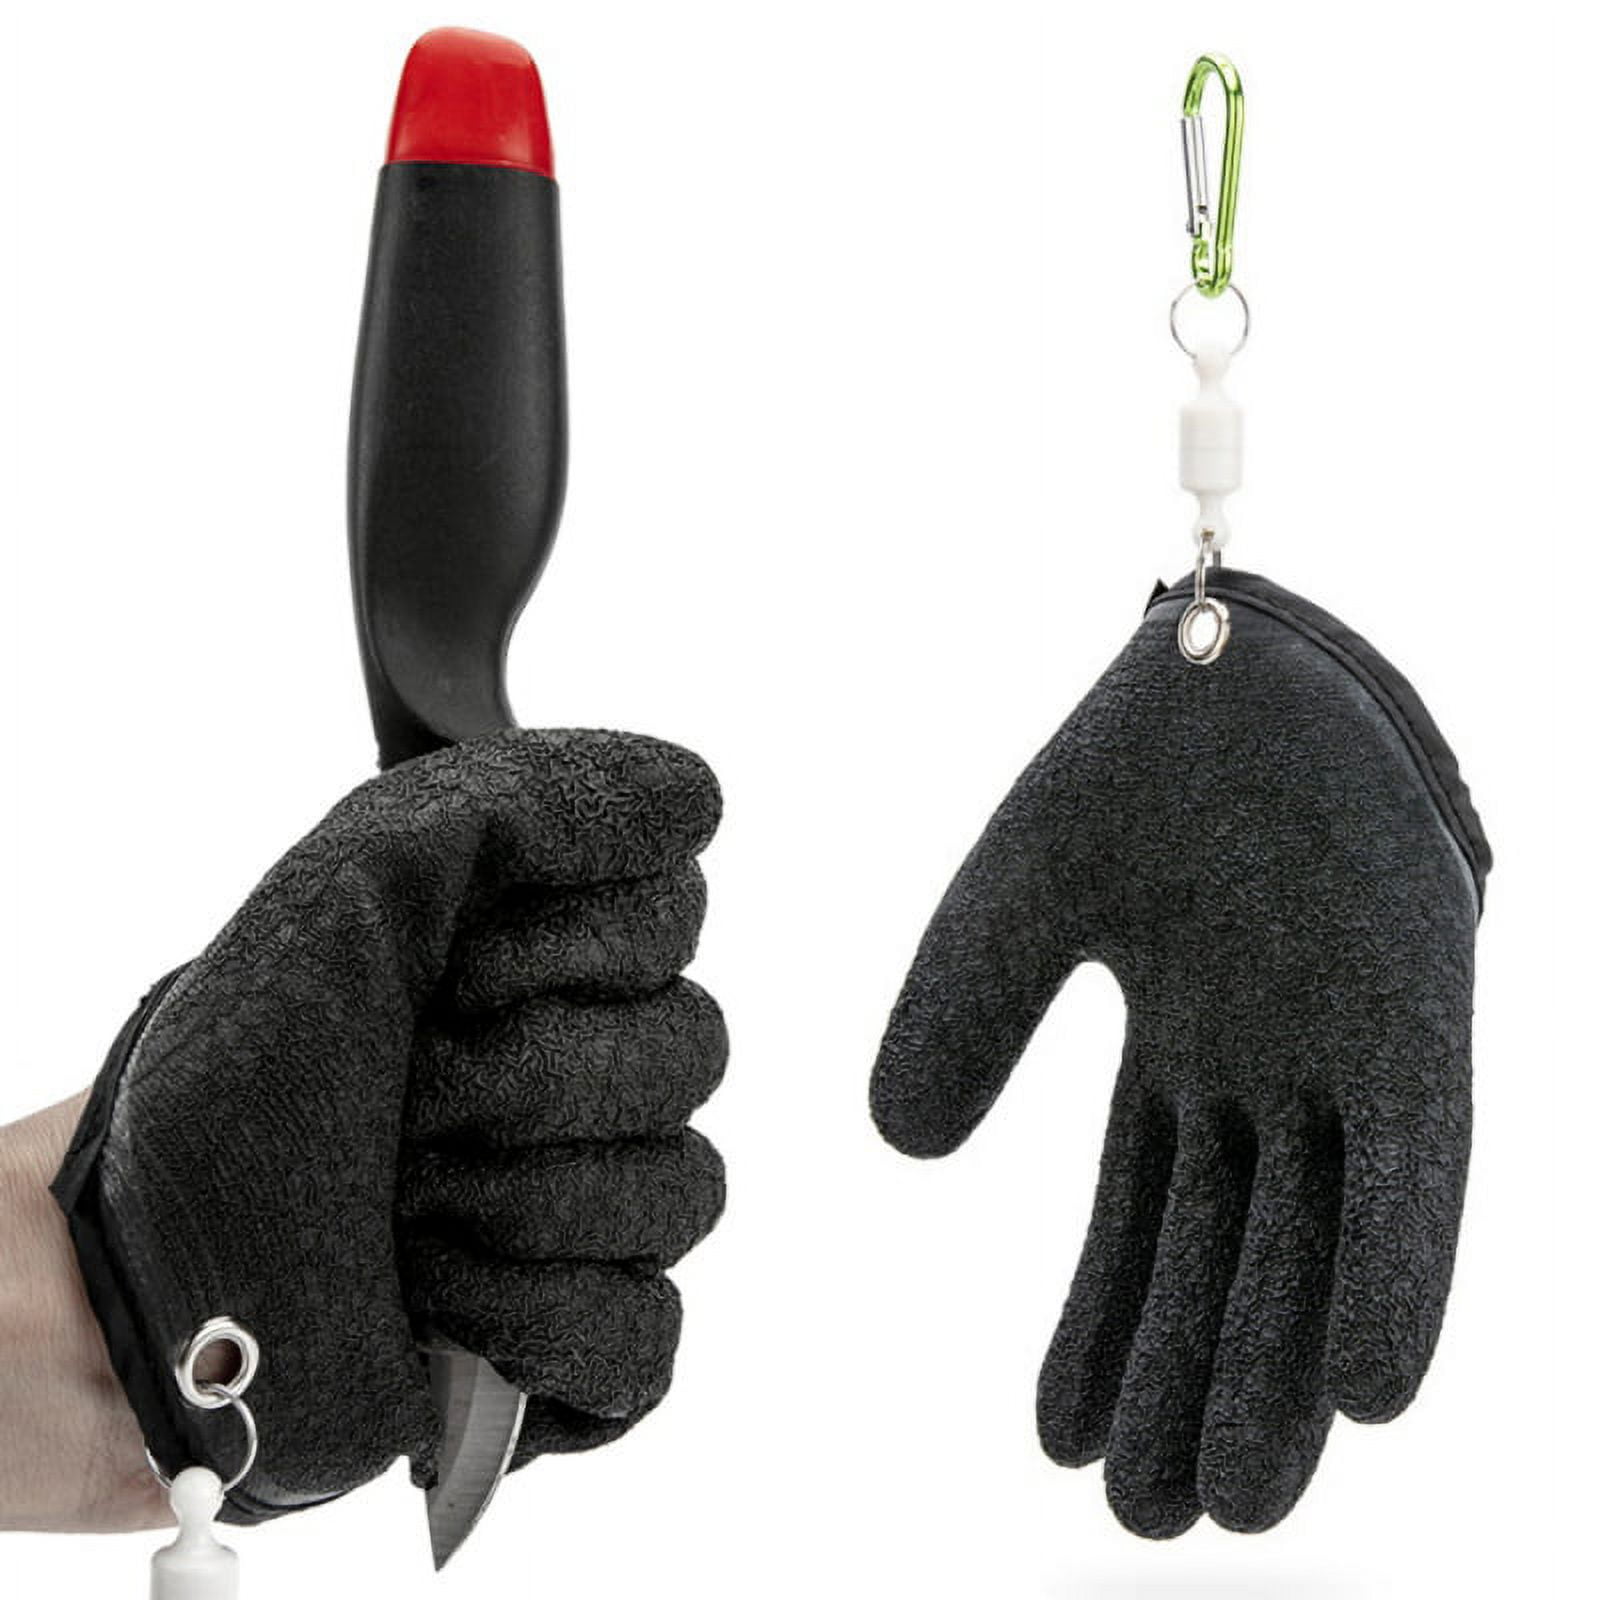 Fishing Glove With Magnet Release Fisherman Professional Catch Fish Gloves  Cut And Puncture Resistant Anti-slip Latex Fishing Gloves With Magnetic